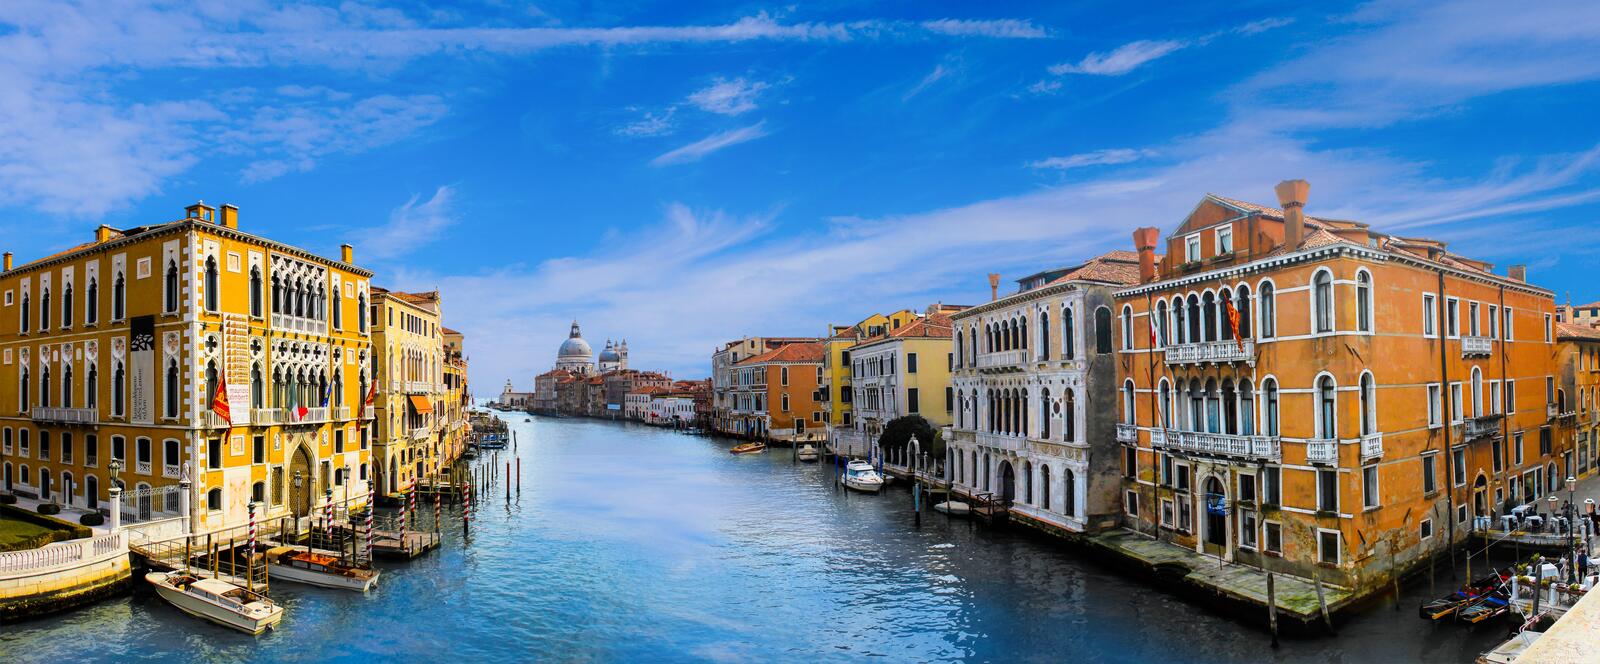 Wallpapers Venice Italy Grand canal in Venice on the desktop